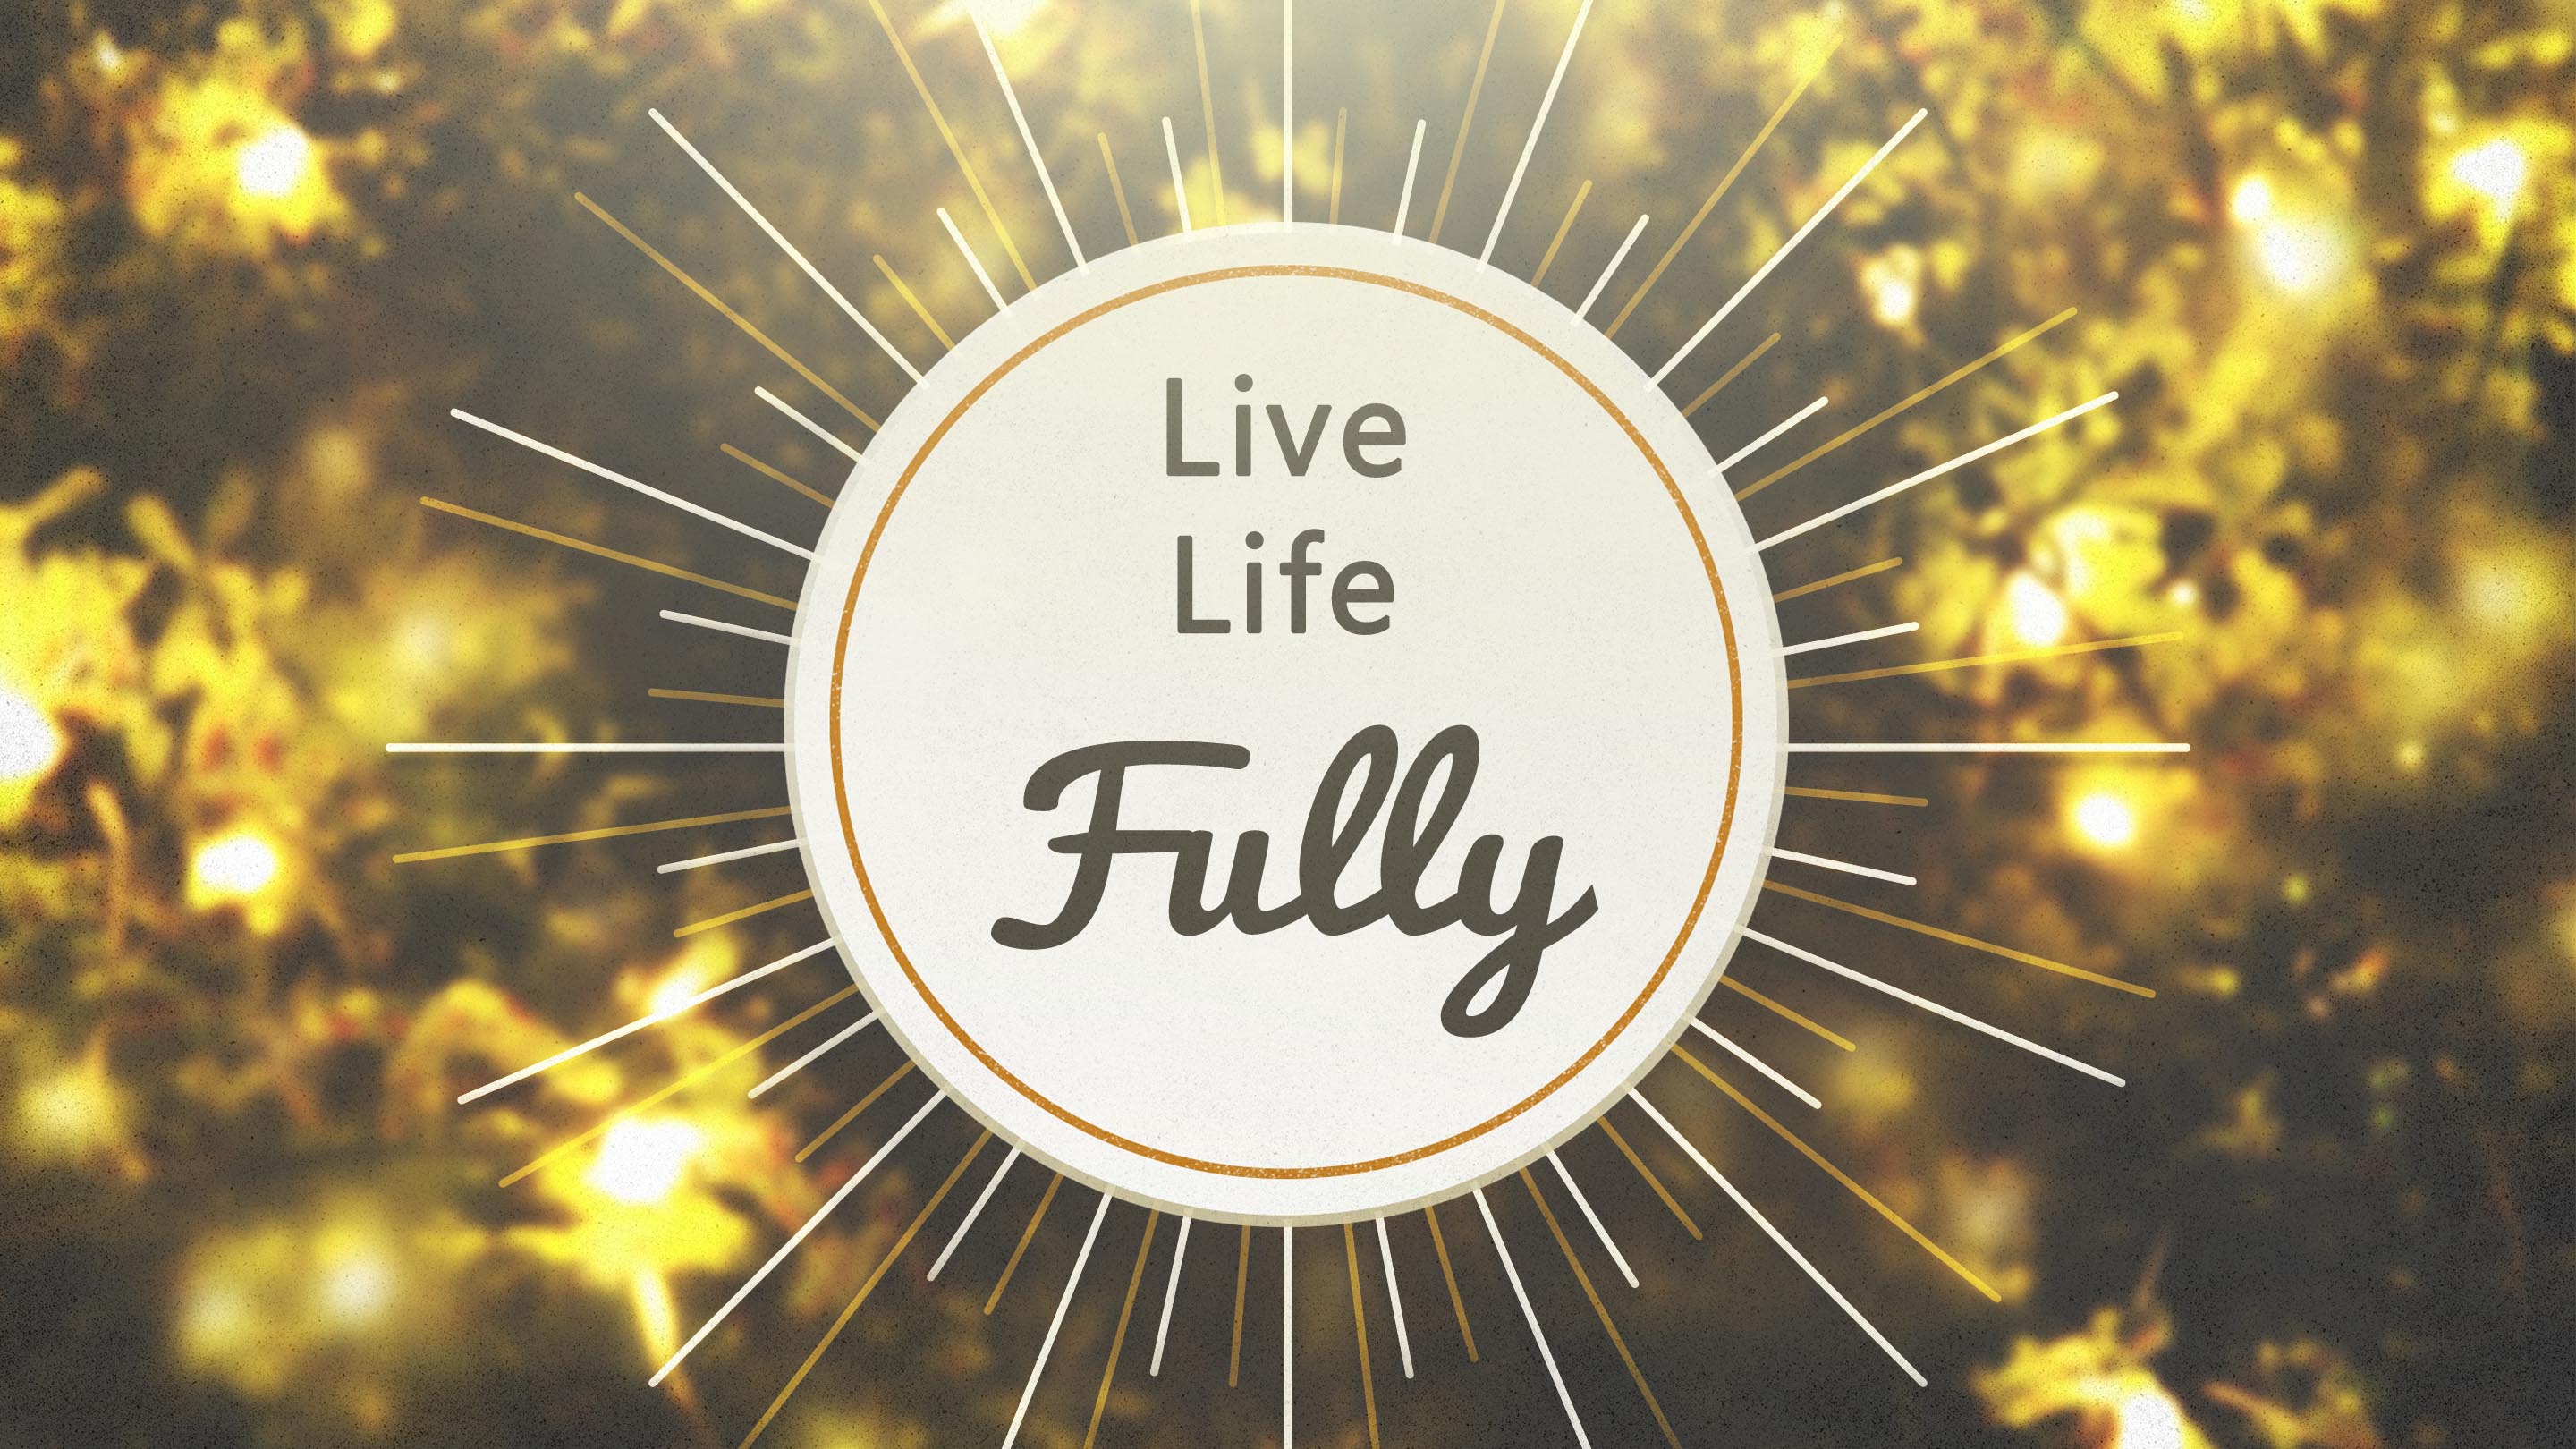 Live Life Fully – Part 2